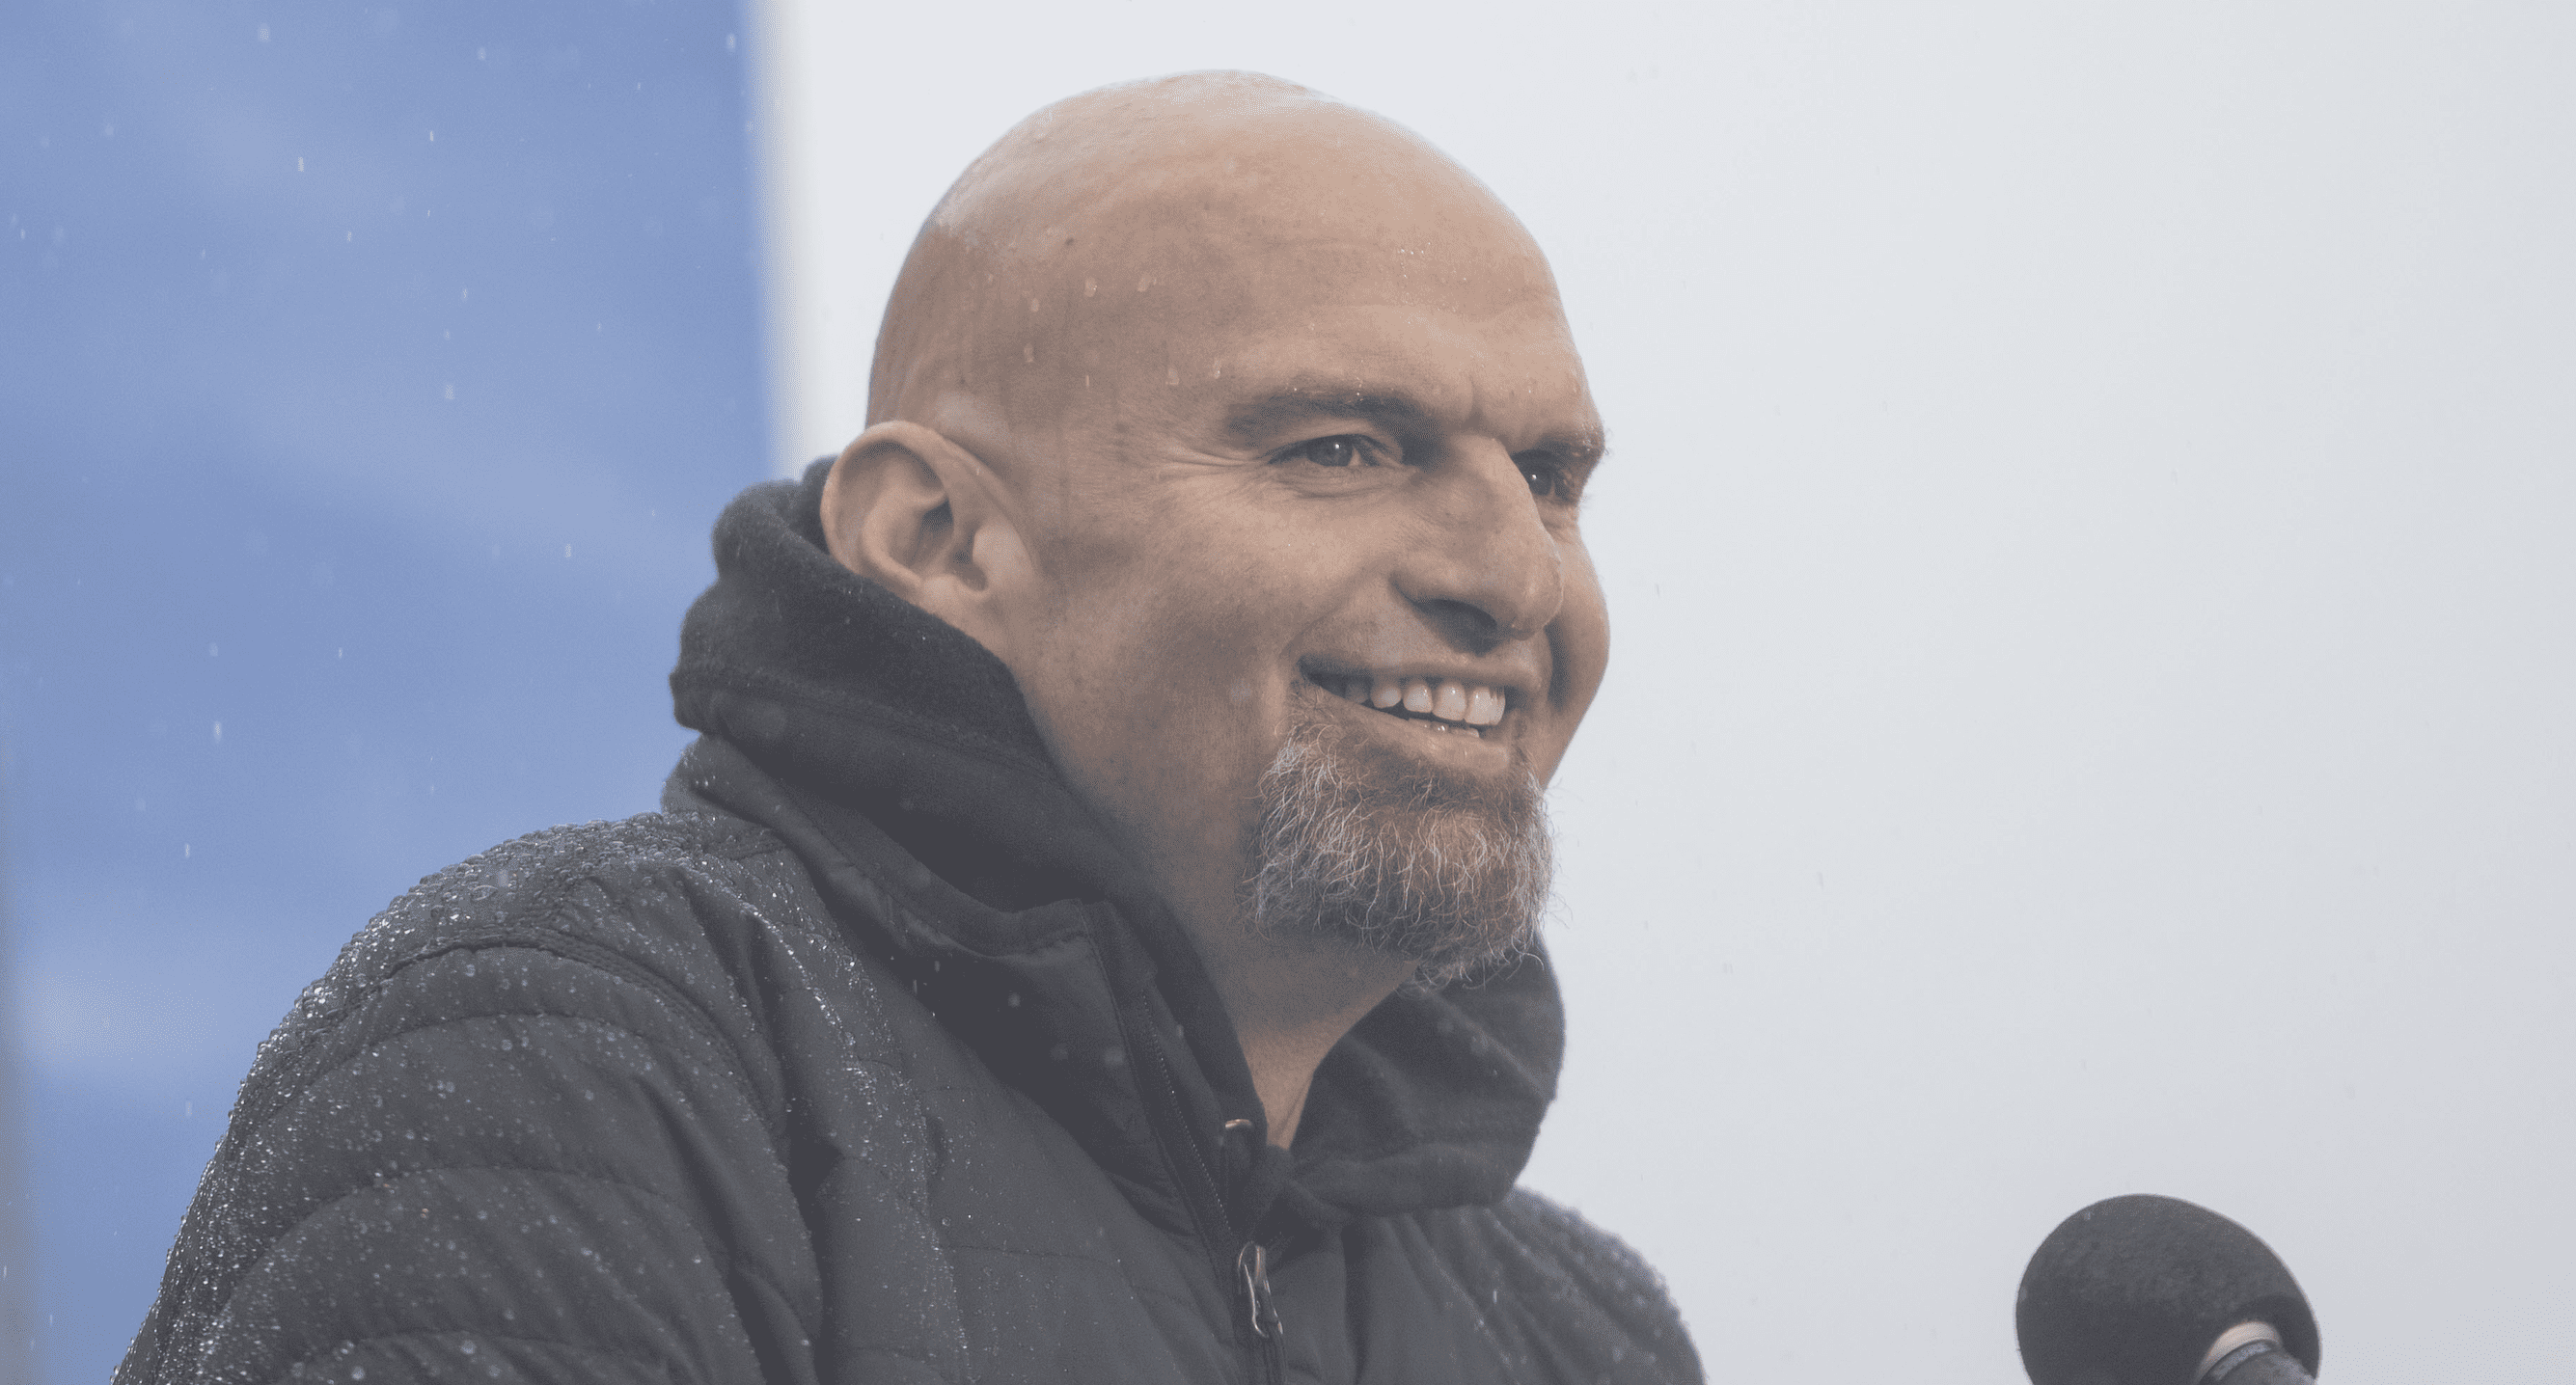 john-fetterman-gives-puzzling-response-when-answering-question-during-interview